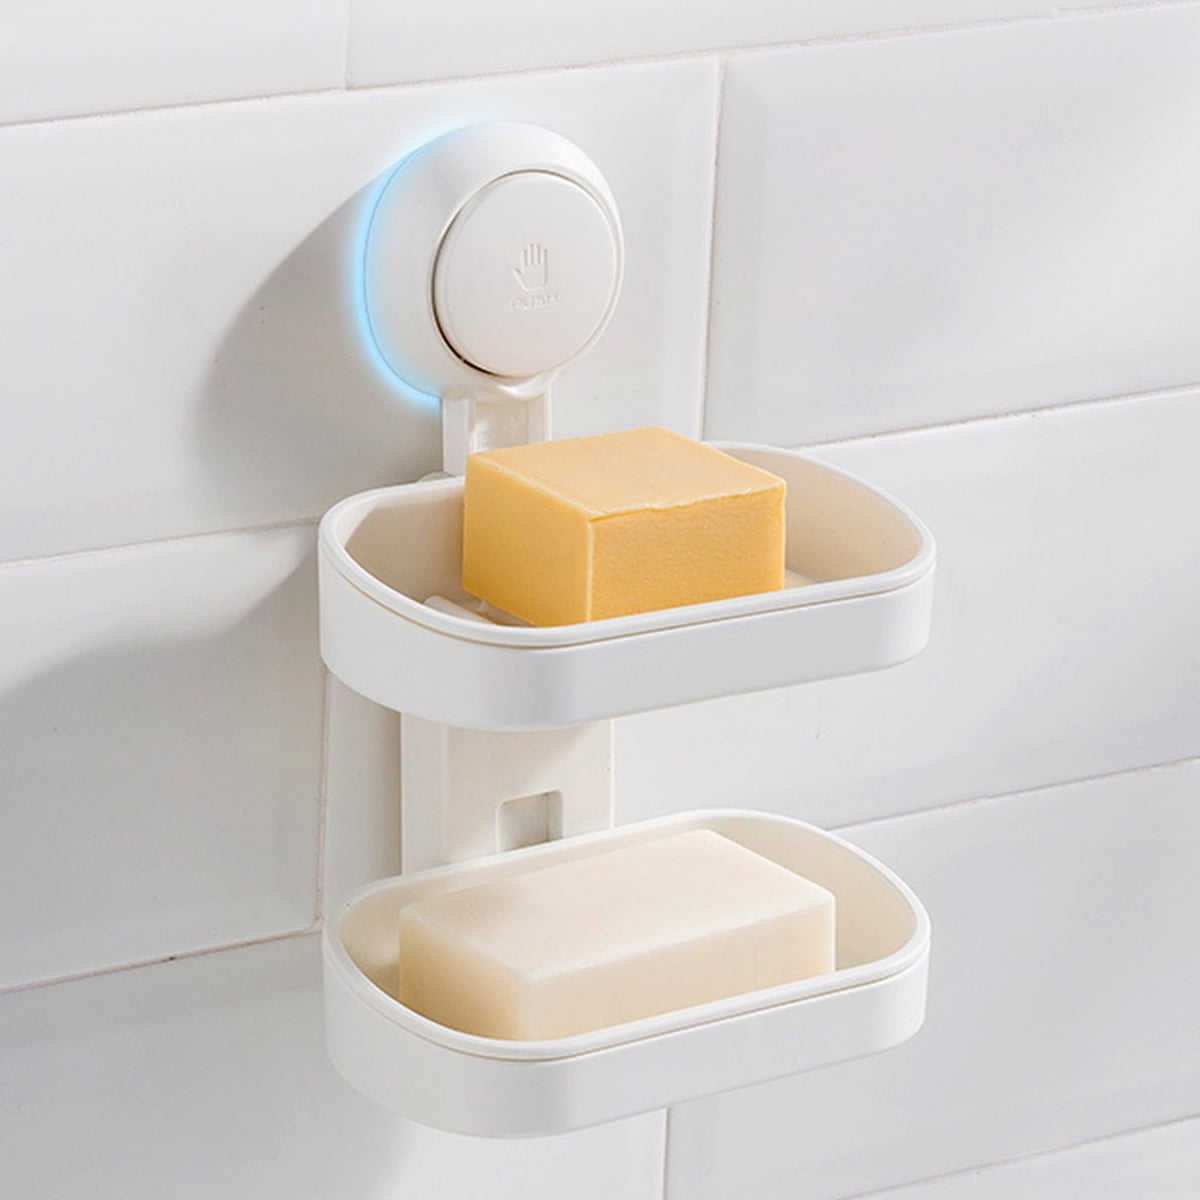 Wall Mounted Stand Soap Dish with Drainer Mouth Plastic Tray for